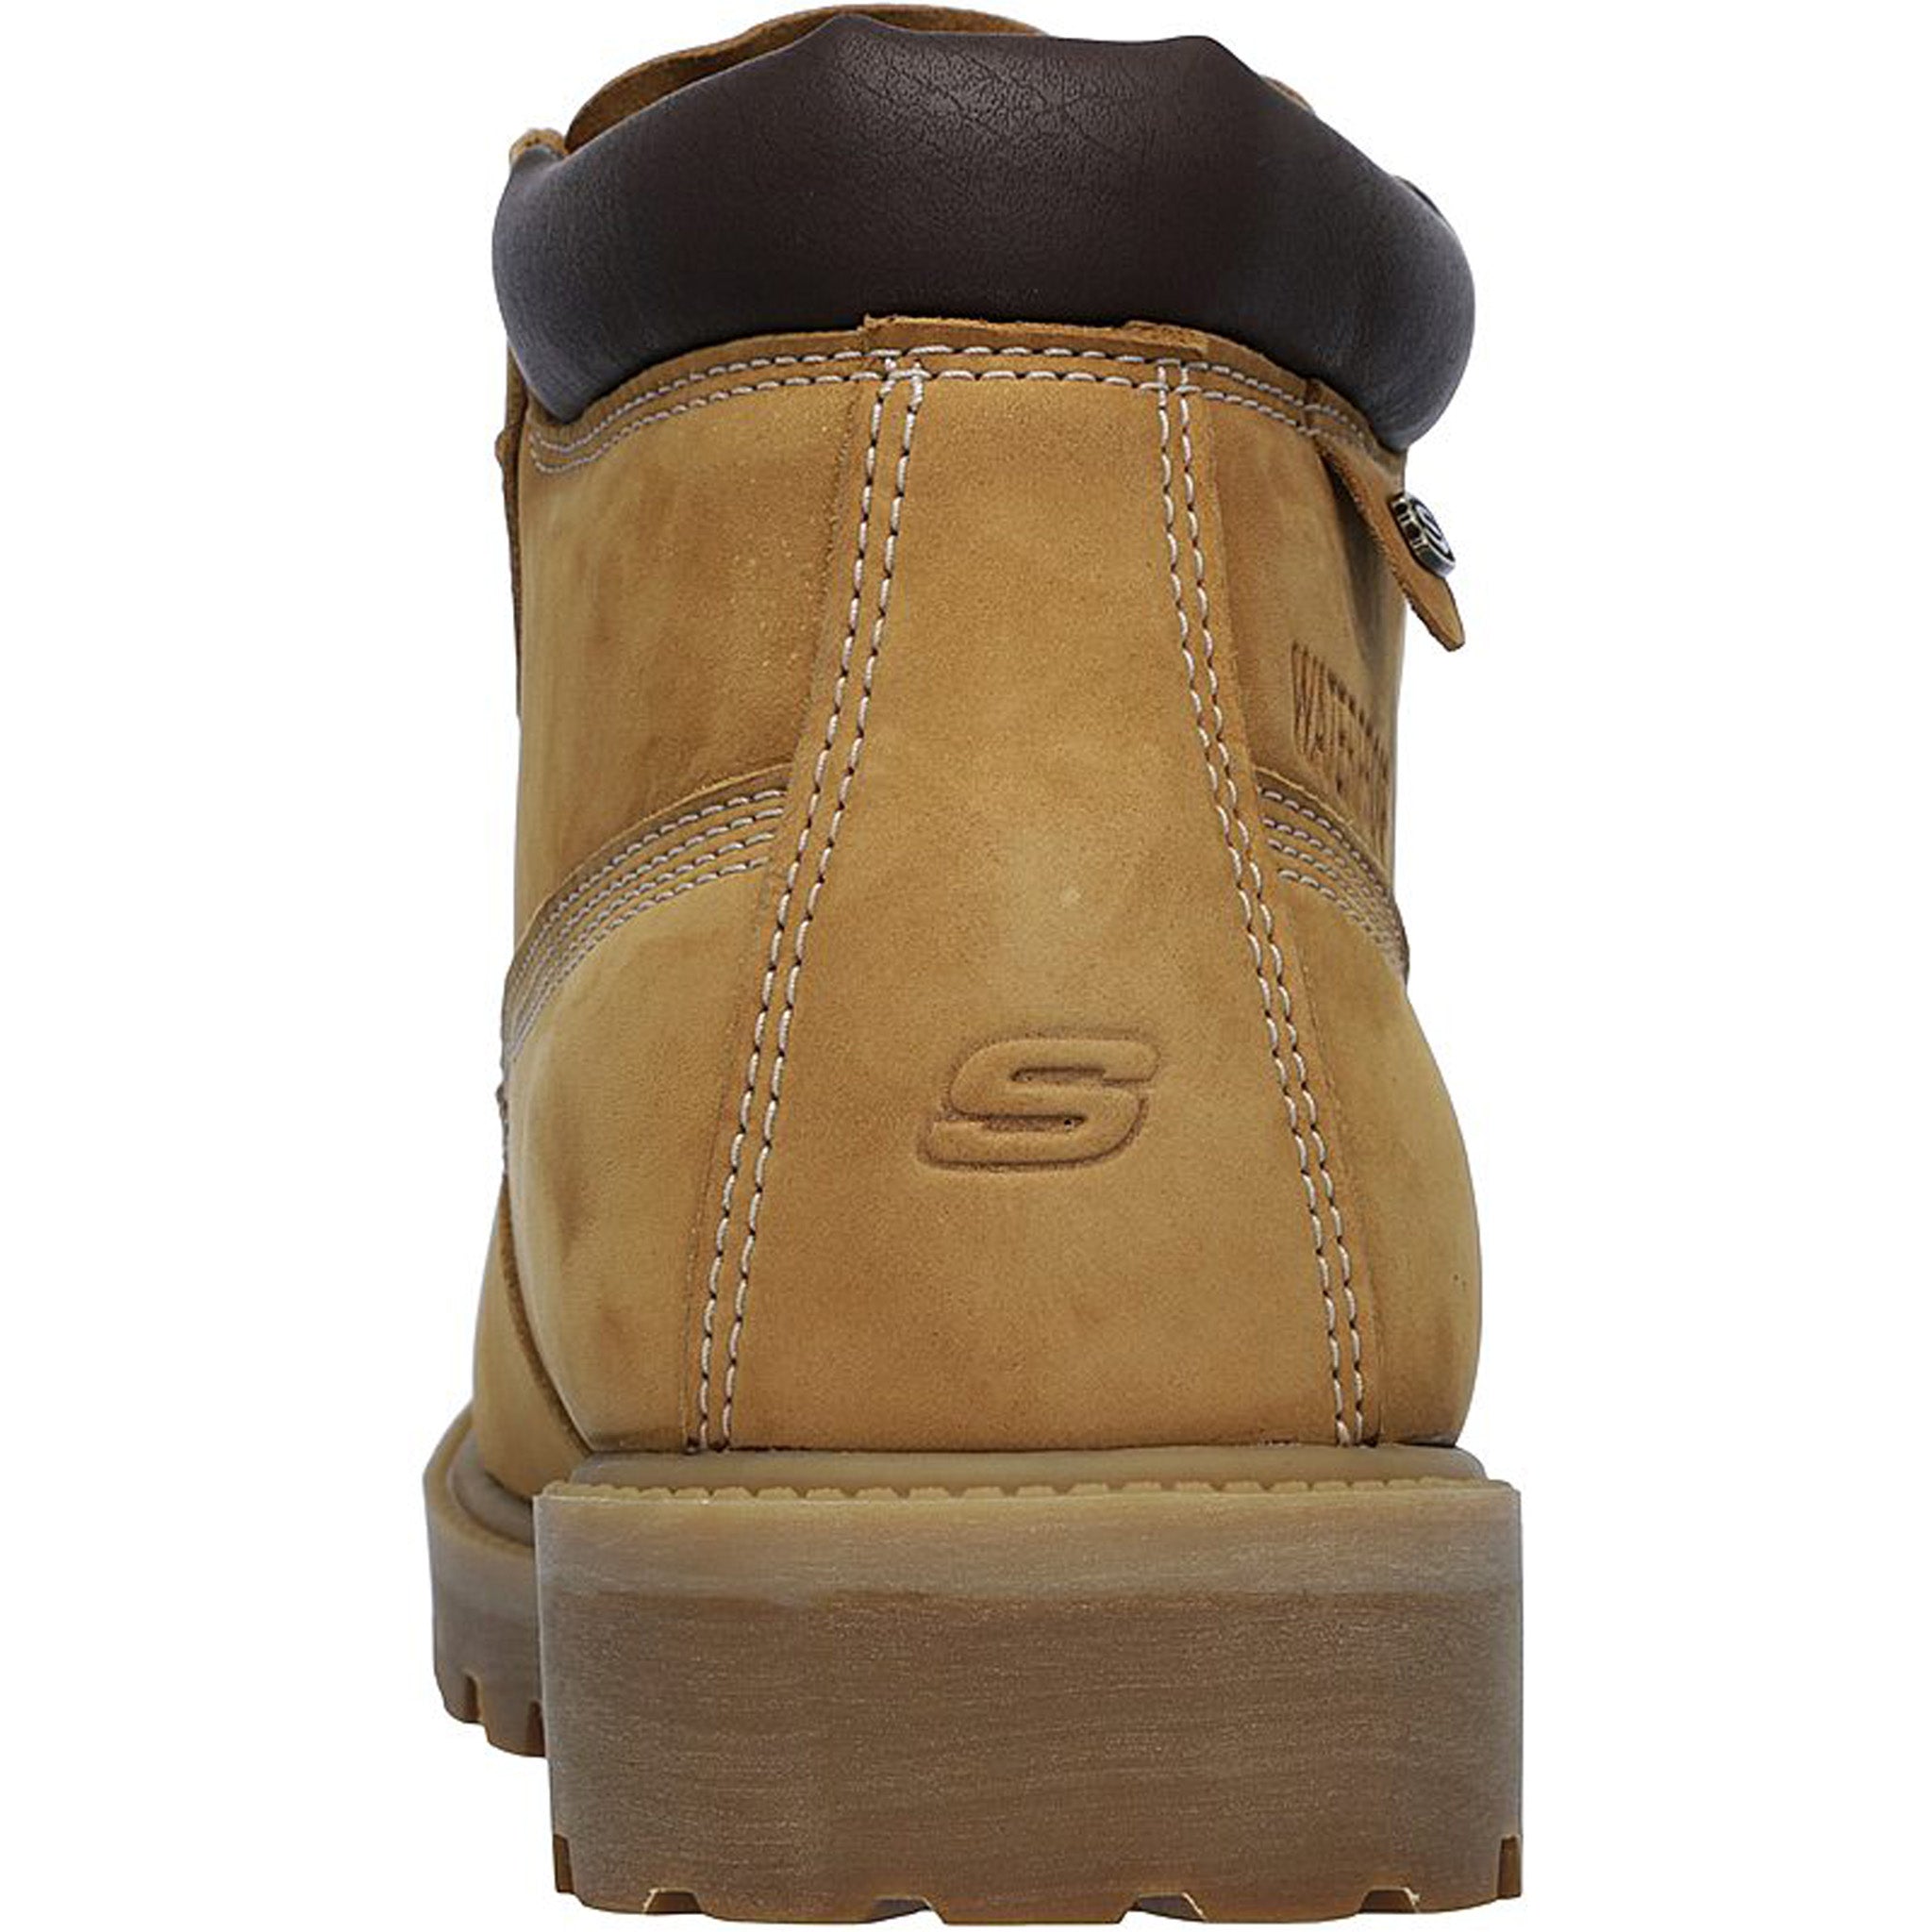 skechers casual boots